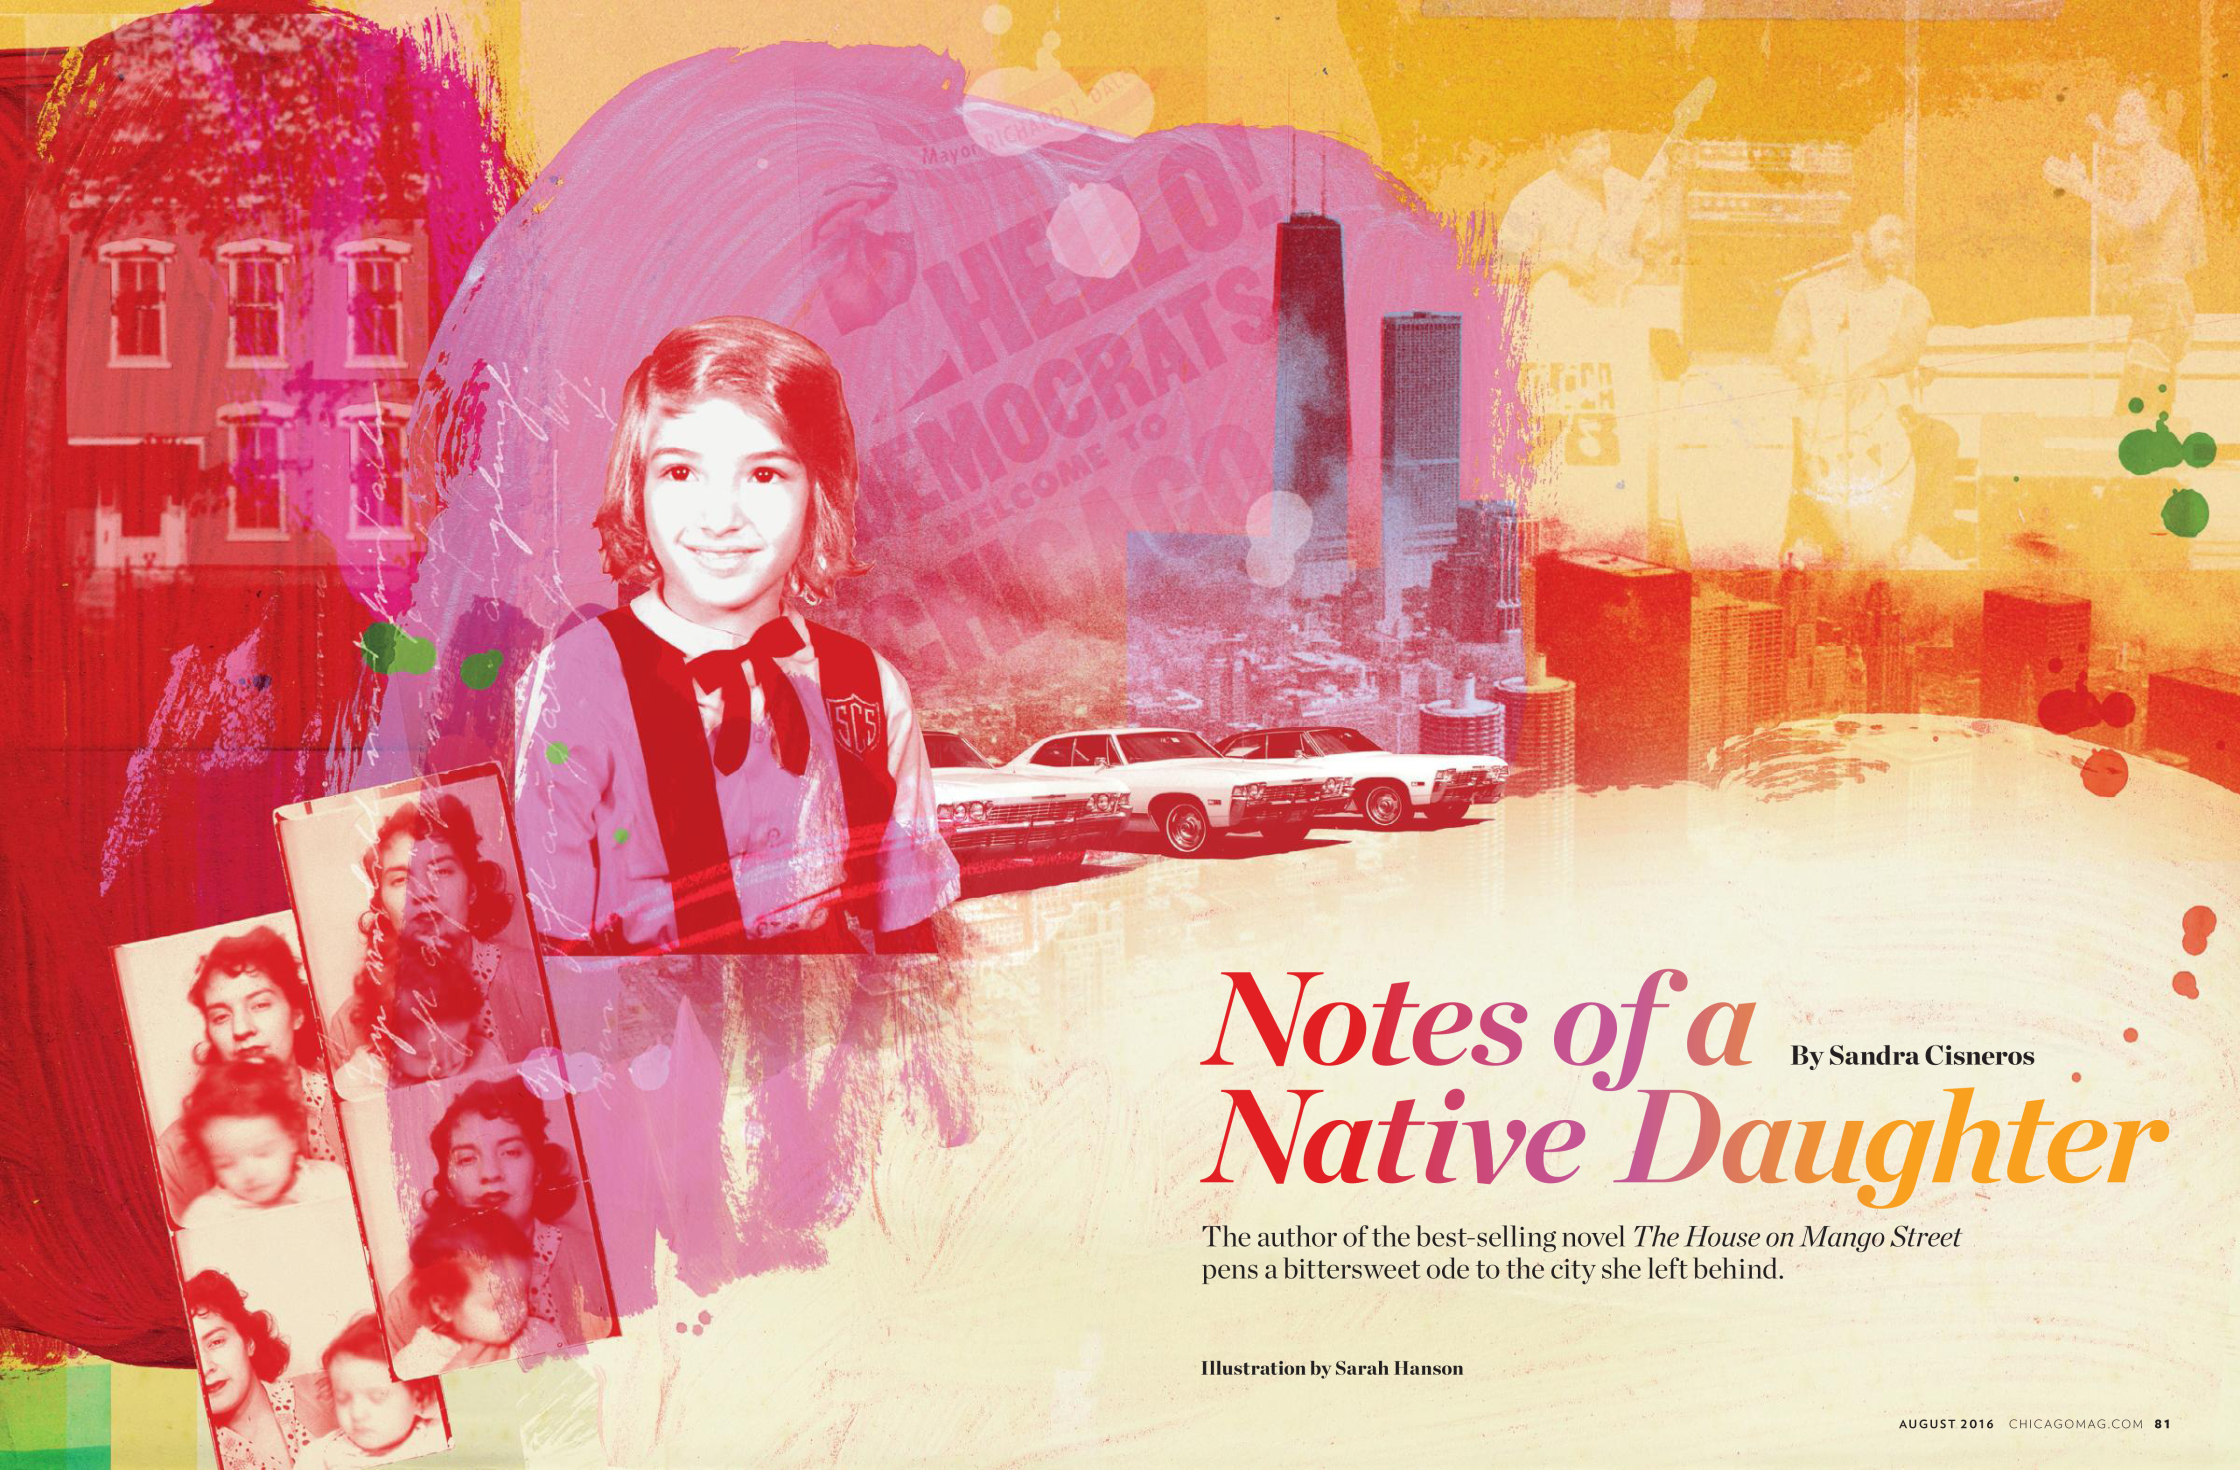 Hanson_Chicago Magazine_Notes of a native daughter.jpg